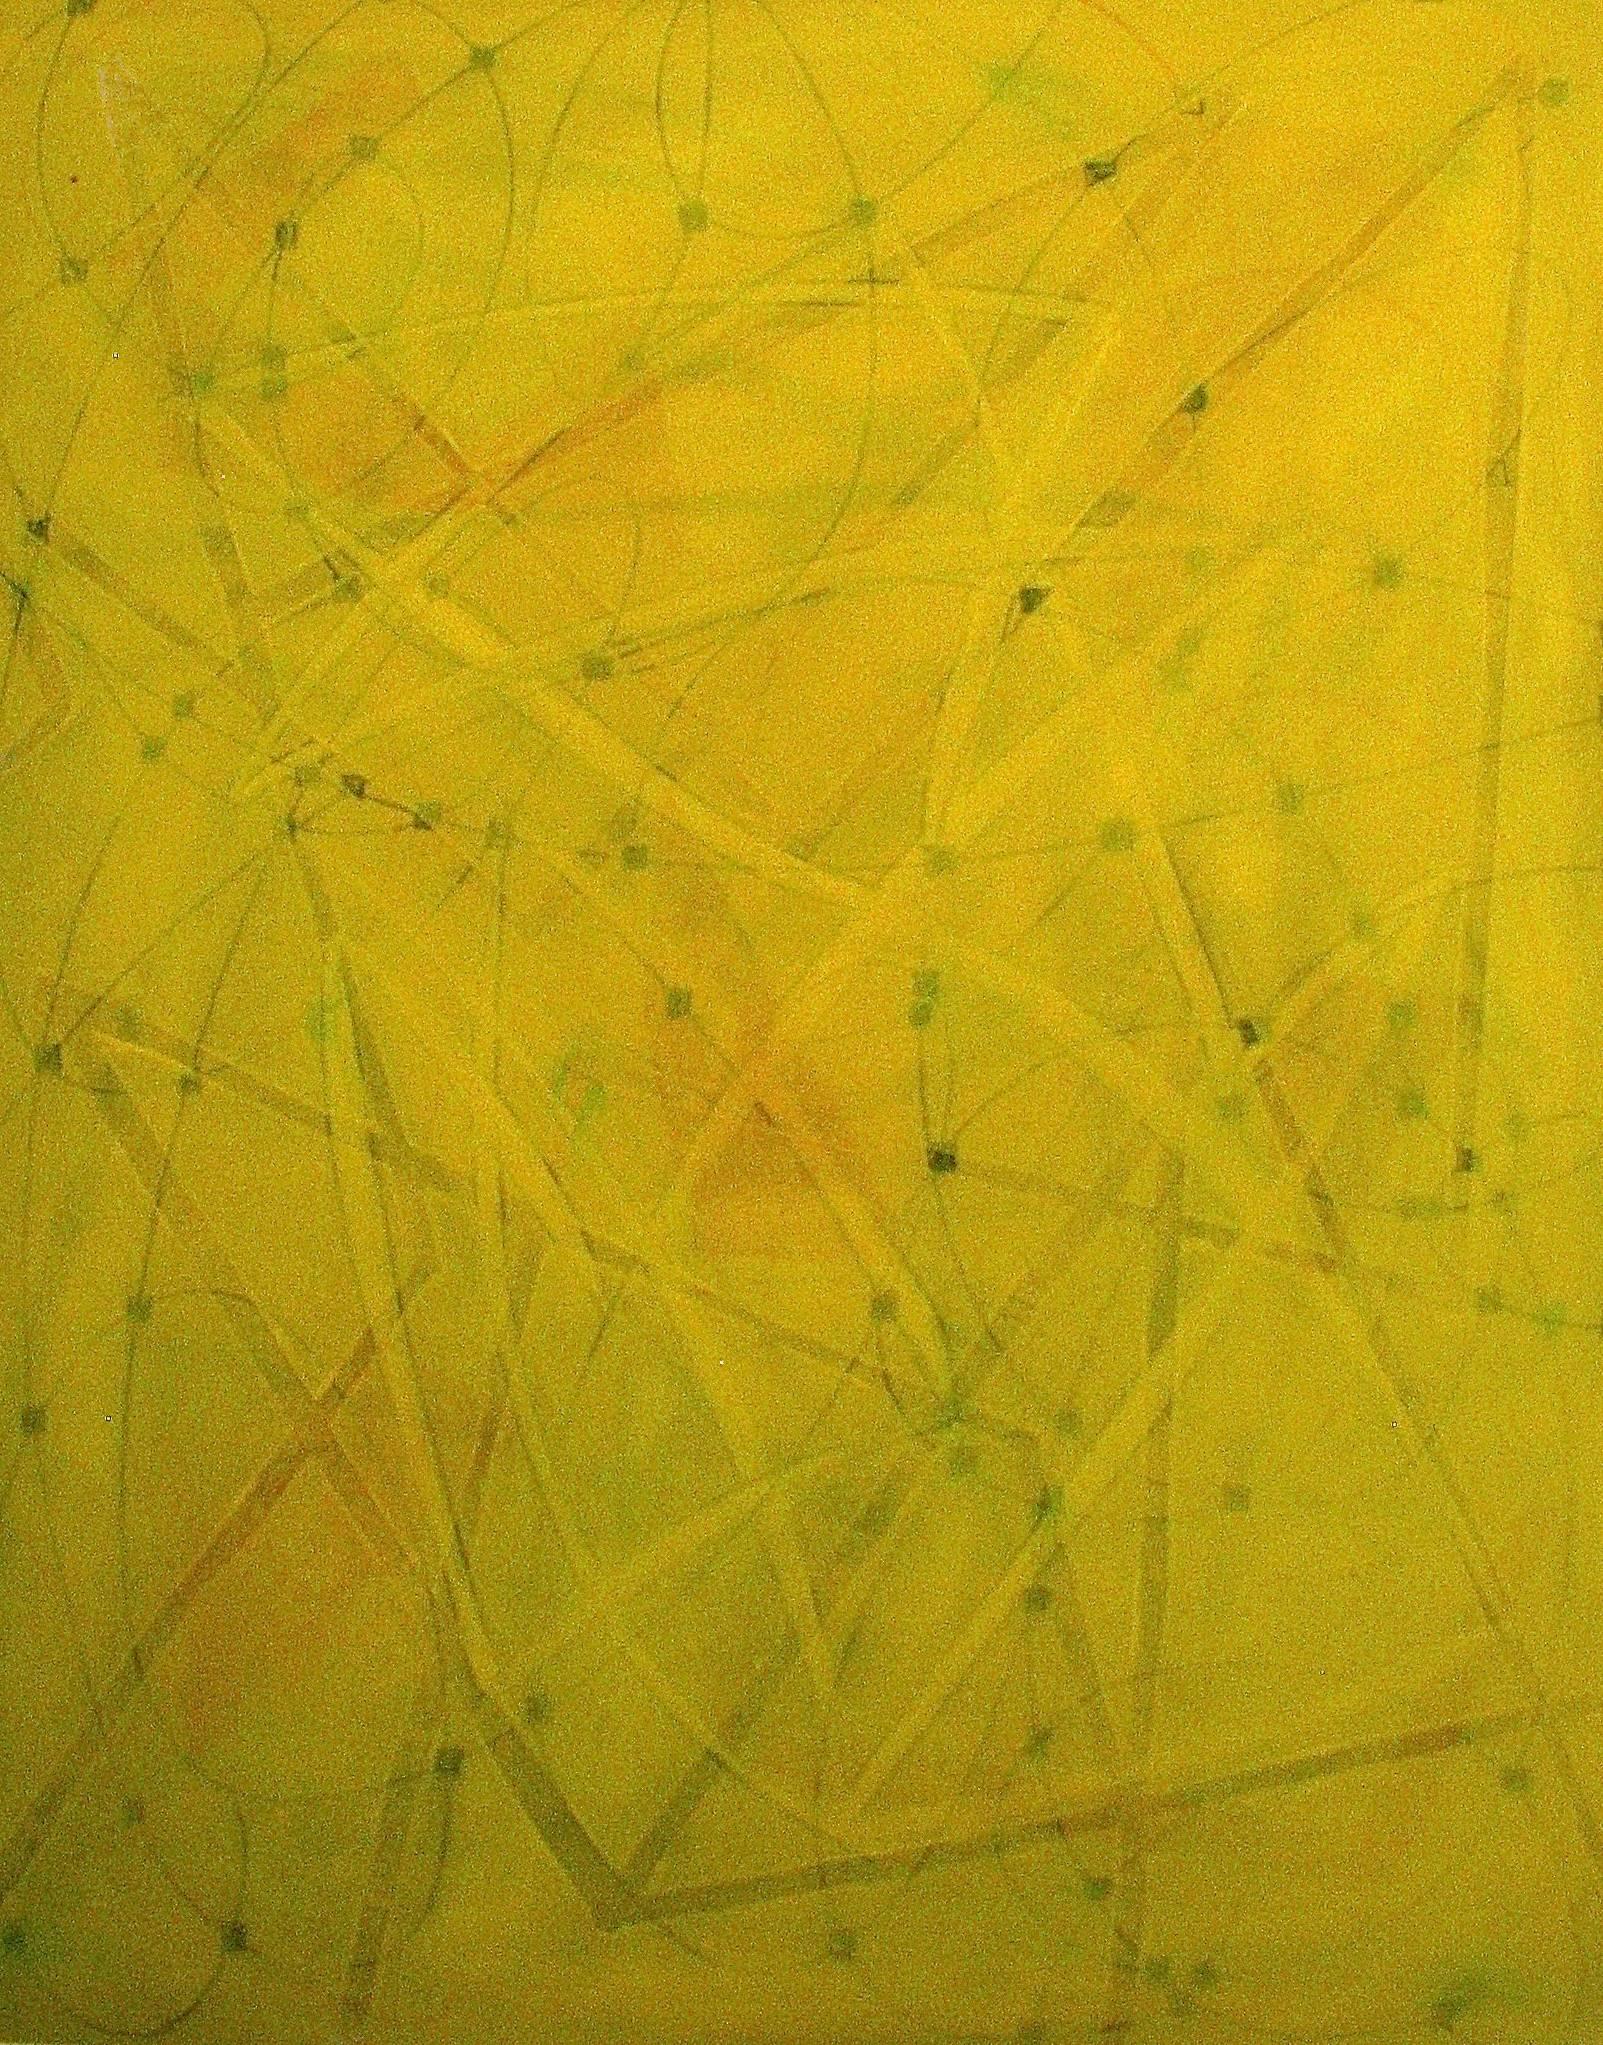 Nancy Berlin Abstract Drawing - "Continuation 4" Abstract Bright Yellow Expressionist Bright Coloful Modern